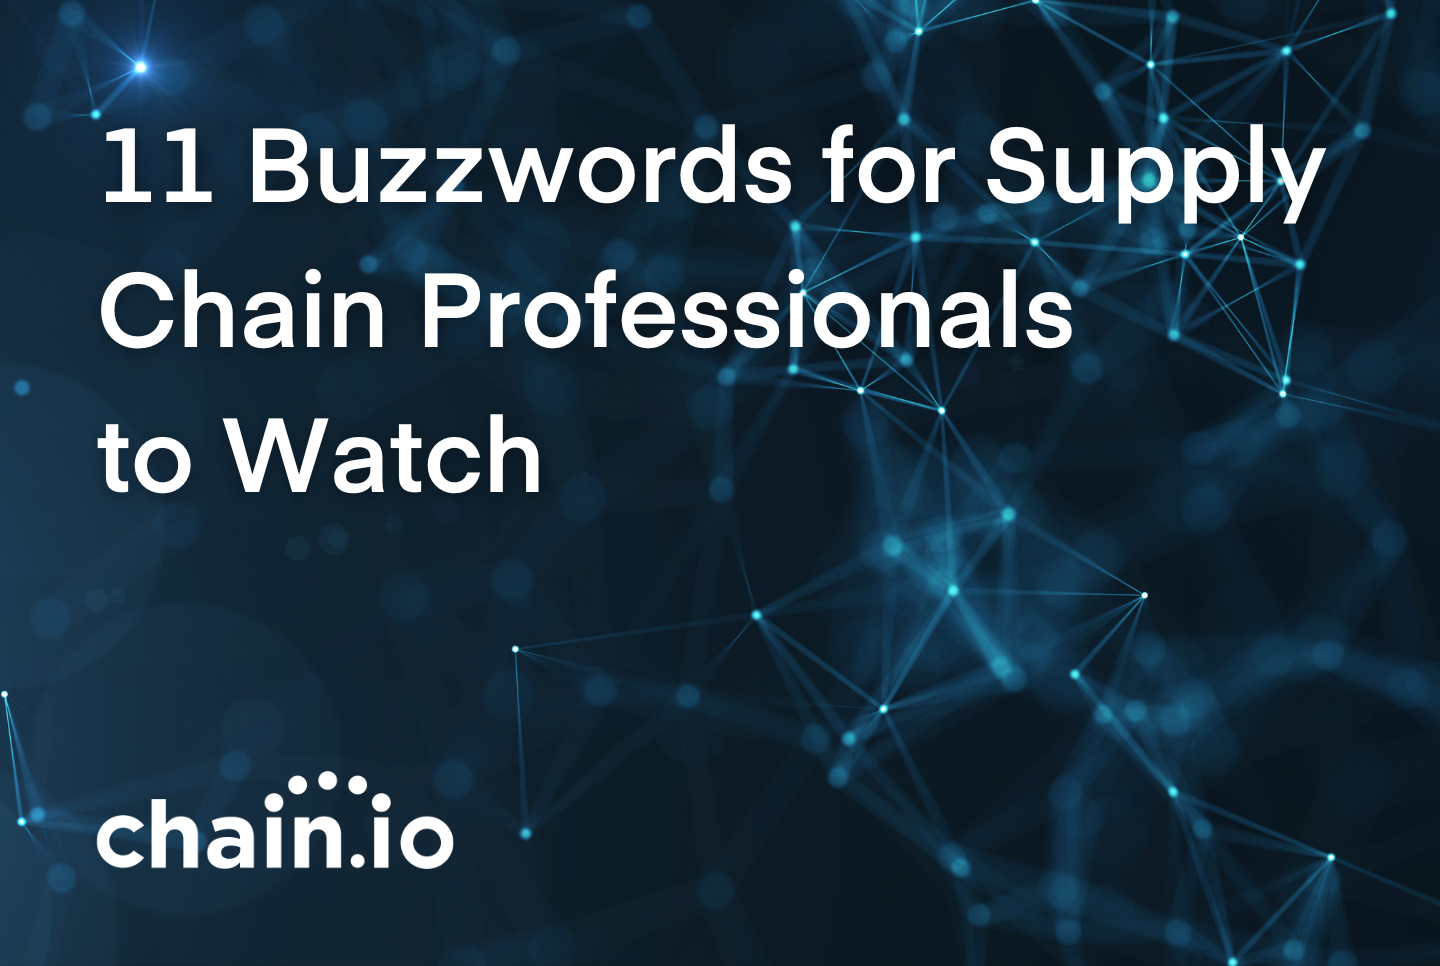 In the last few years, many buzzwords emerged within the supply chain technology space, but eleven have stuck around and are even starting to be widely used across the industry. 